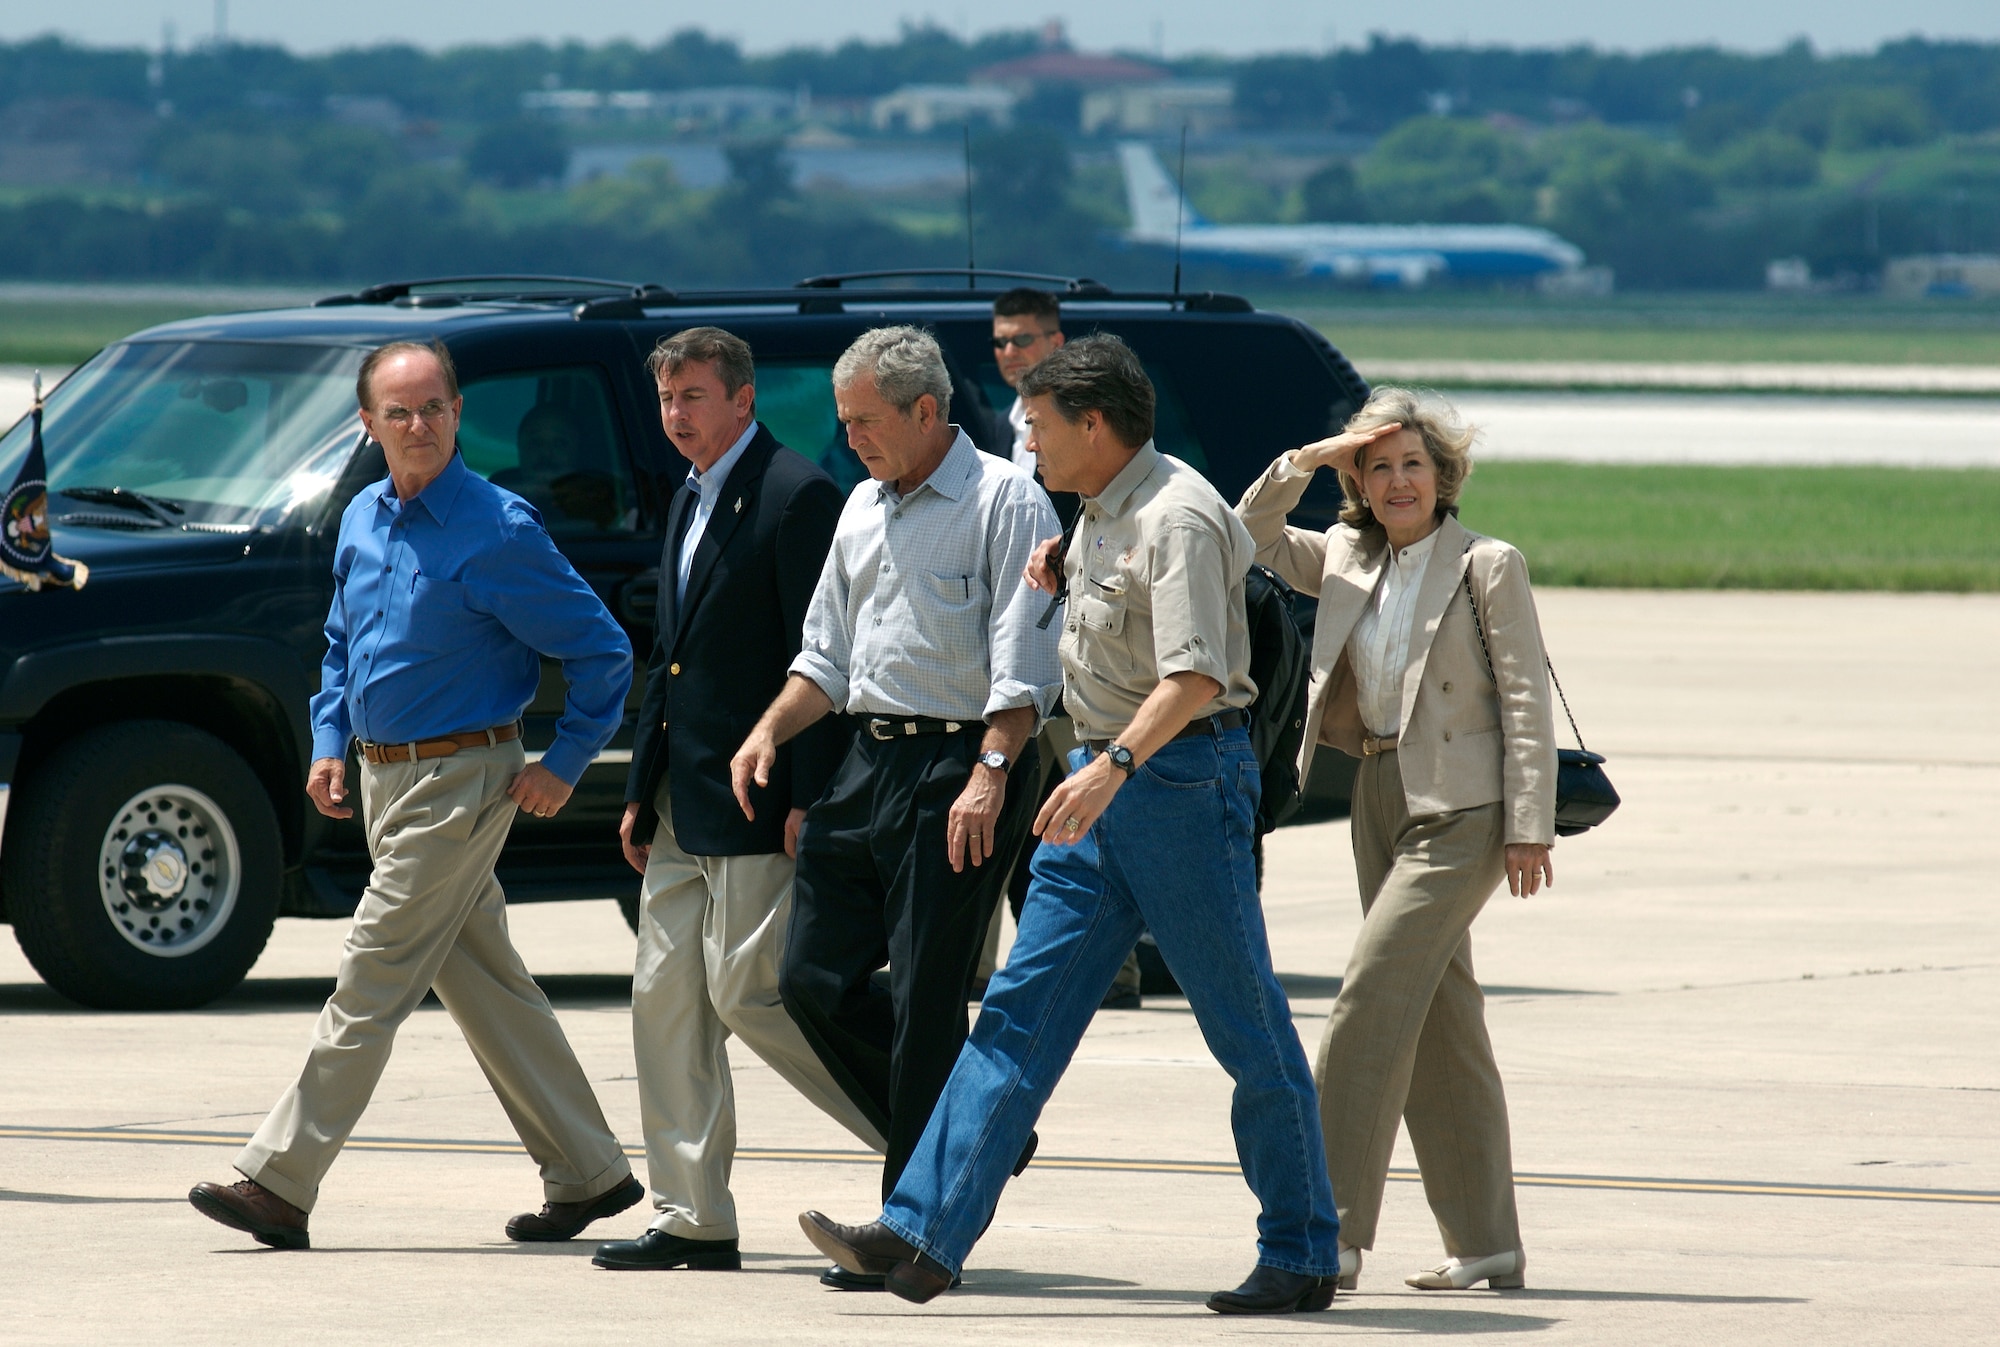 President George W. Bush (center) walks with Texas Gov. Rick Perry (right) and Texas Sen. Kay Bailey Hutchison, (far right) as they exit Air Force One Sept. 1 at Lackland Air Force Base, Texas. The president visited San Antonio to be briefed on evacuation processes in response to Hurricane Gustav and to personally thank the Airmen responsible for the successful relief efforts. (U.S. Air Force photo/Staff Sgt. Bennie J. Davis III) 